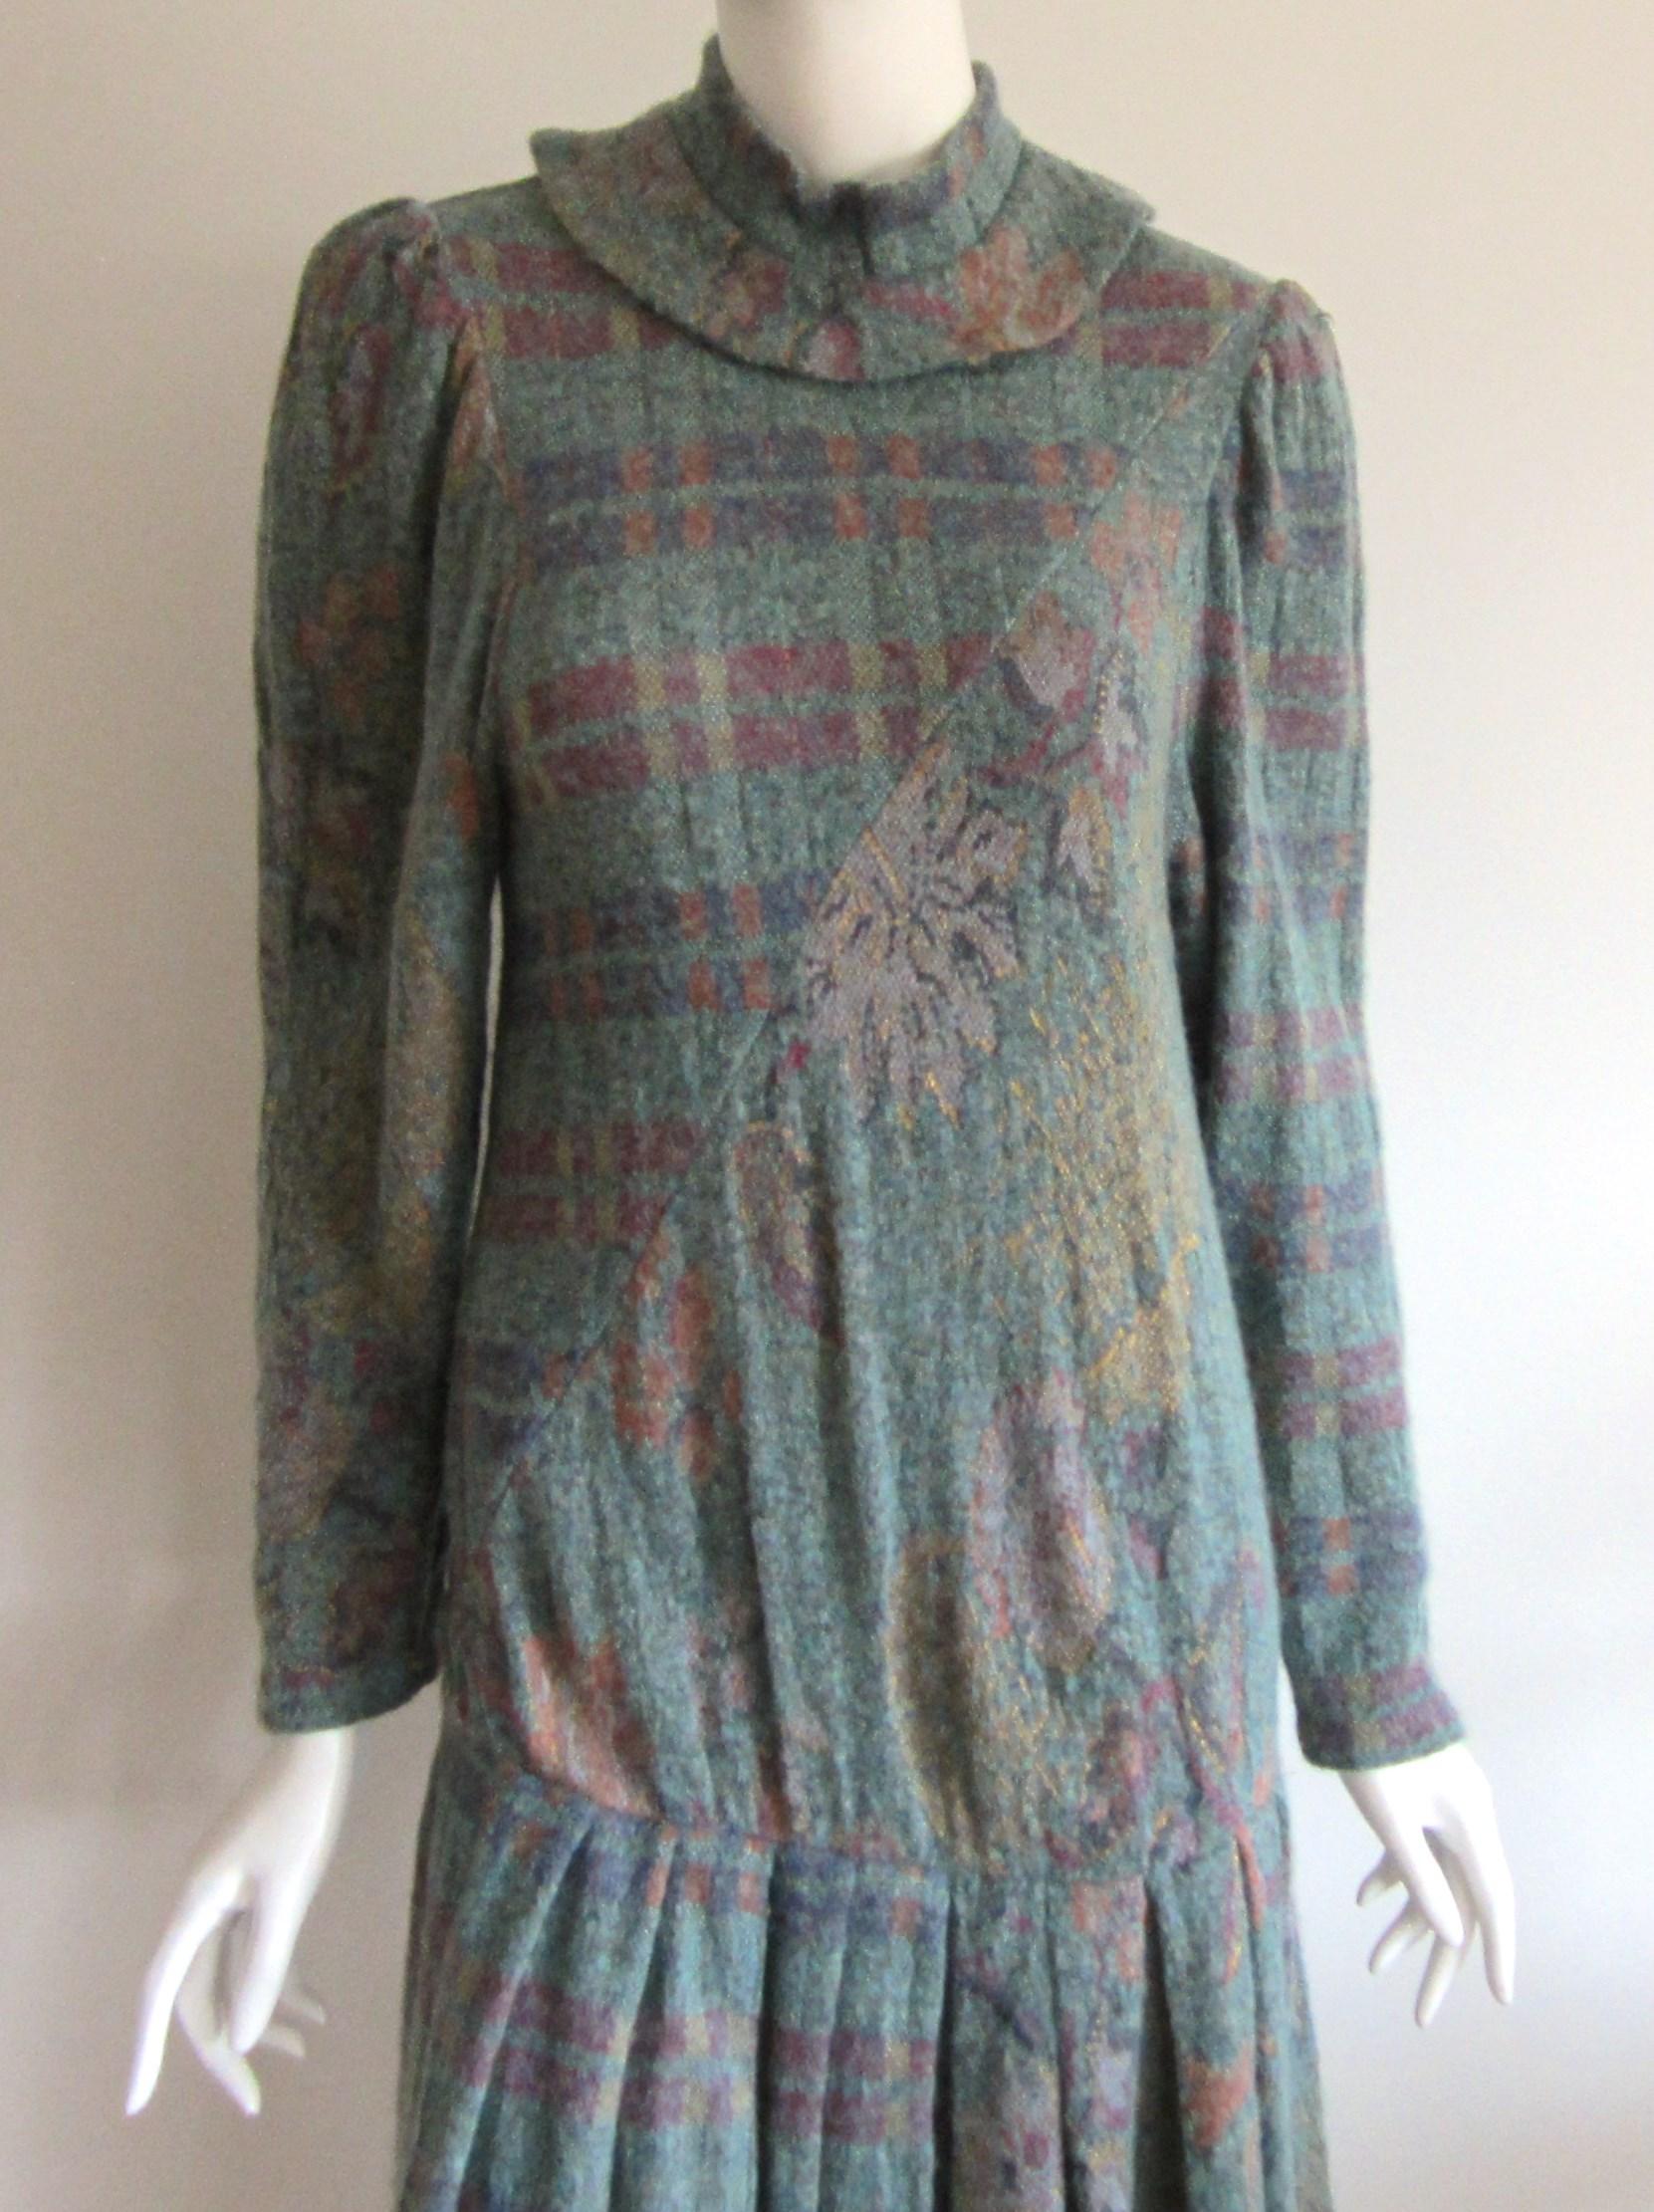 Lovely Wool blend Ted Lapidus Multi Colored (what feels like a wool / mohair blend) Dress. Has a madarin style collar with a drop skirt. Floral and check design. Measuring (labeled a 36) Up to 34 in. bust - Up to 34 in waist - up to 36 in hips - 44